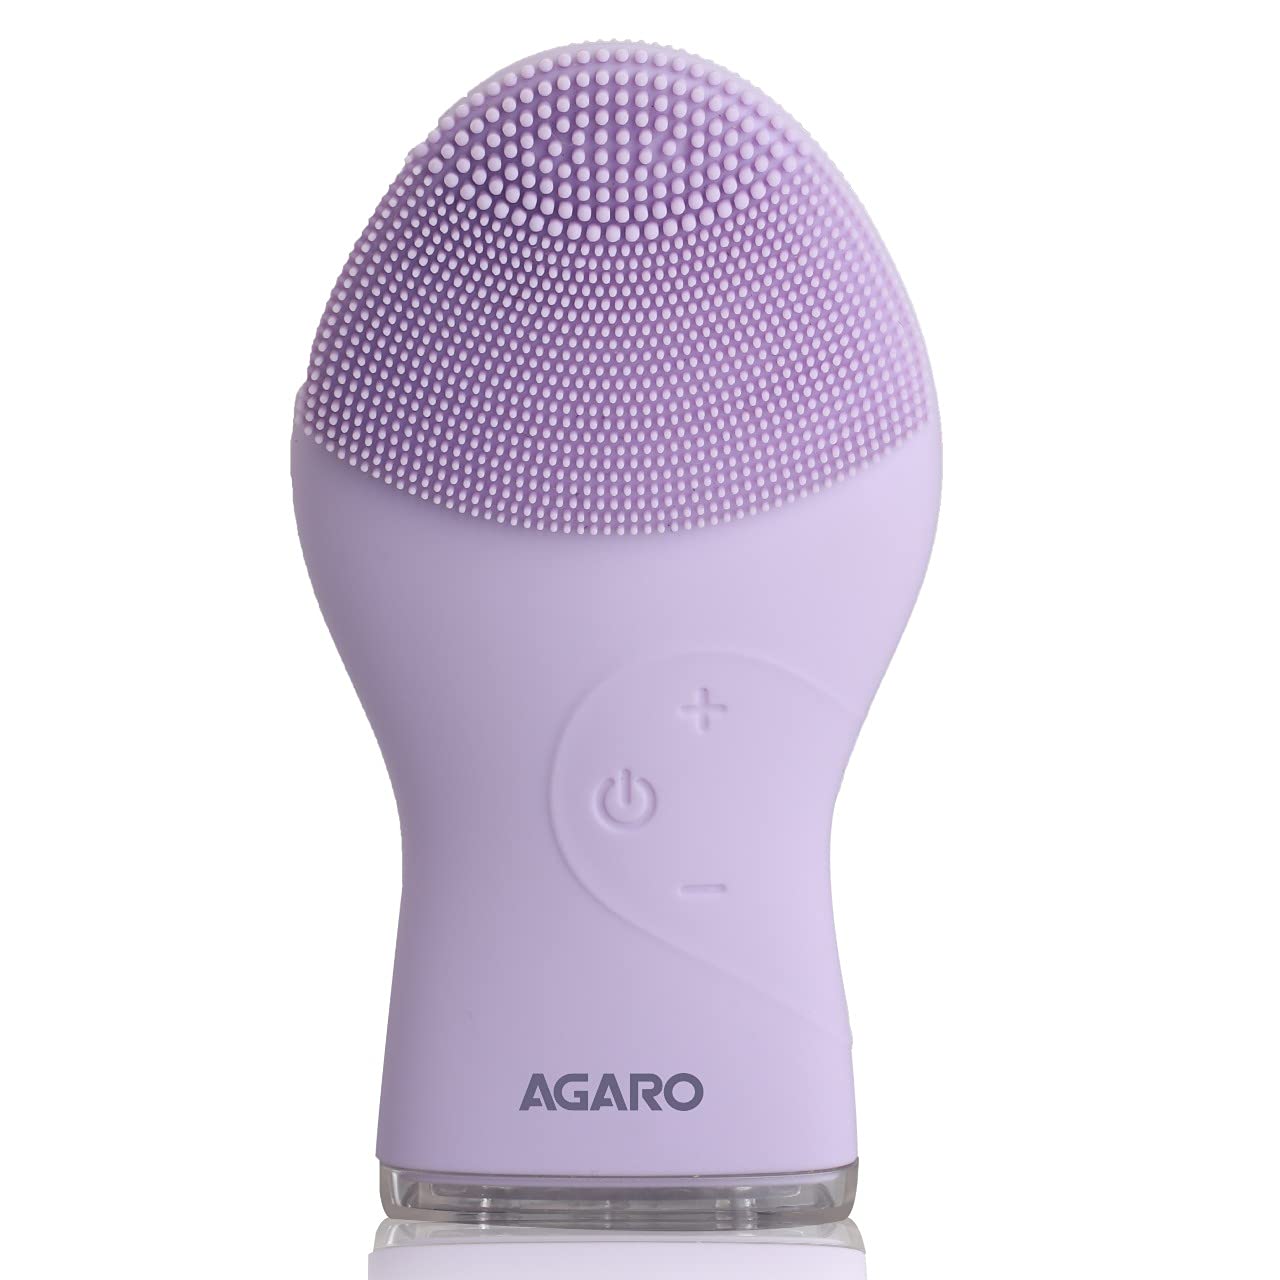 AGARO CM2107 Sonic Facial Cleansing Massager, Ultra Hygienic Soft Silicone Facial Cleansing Brush